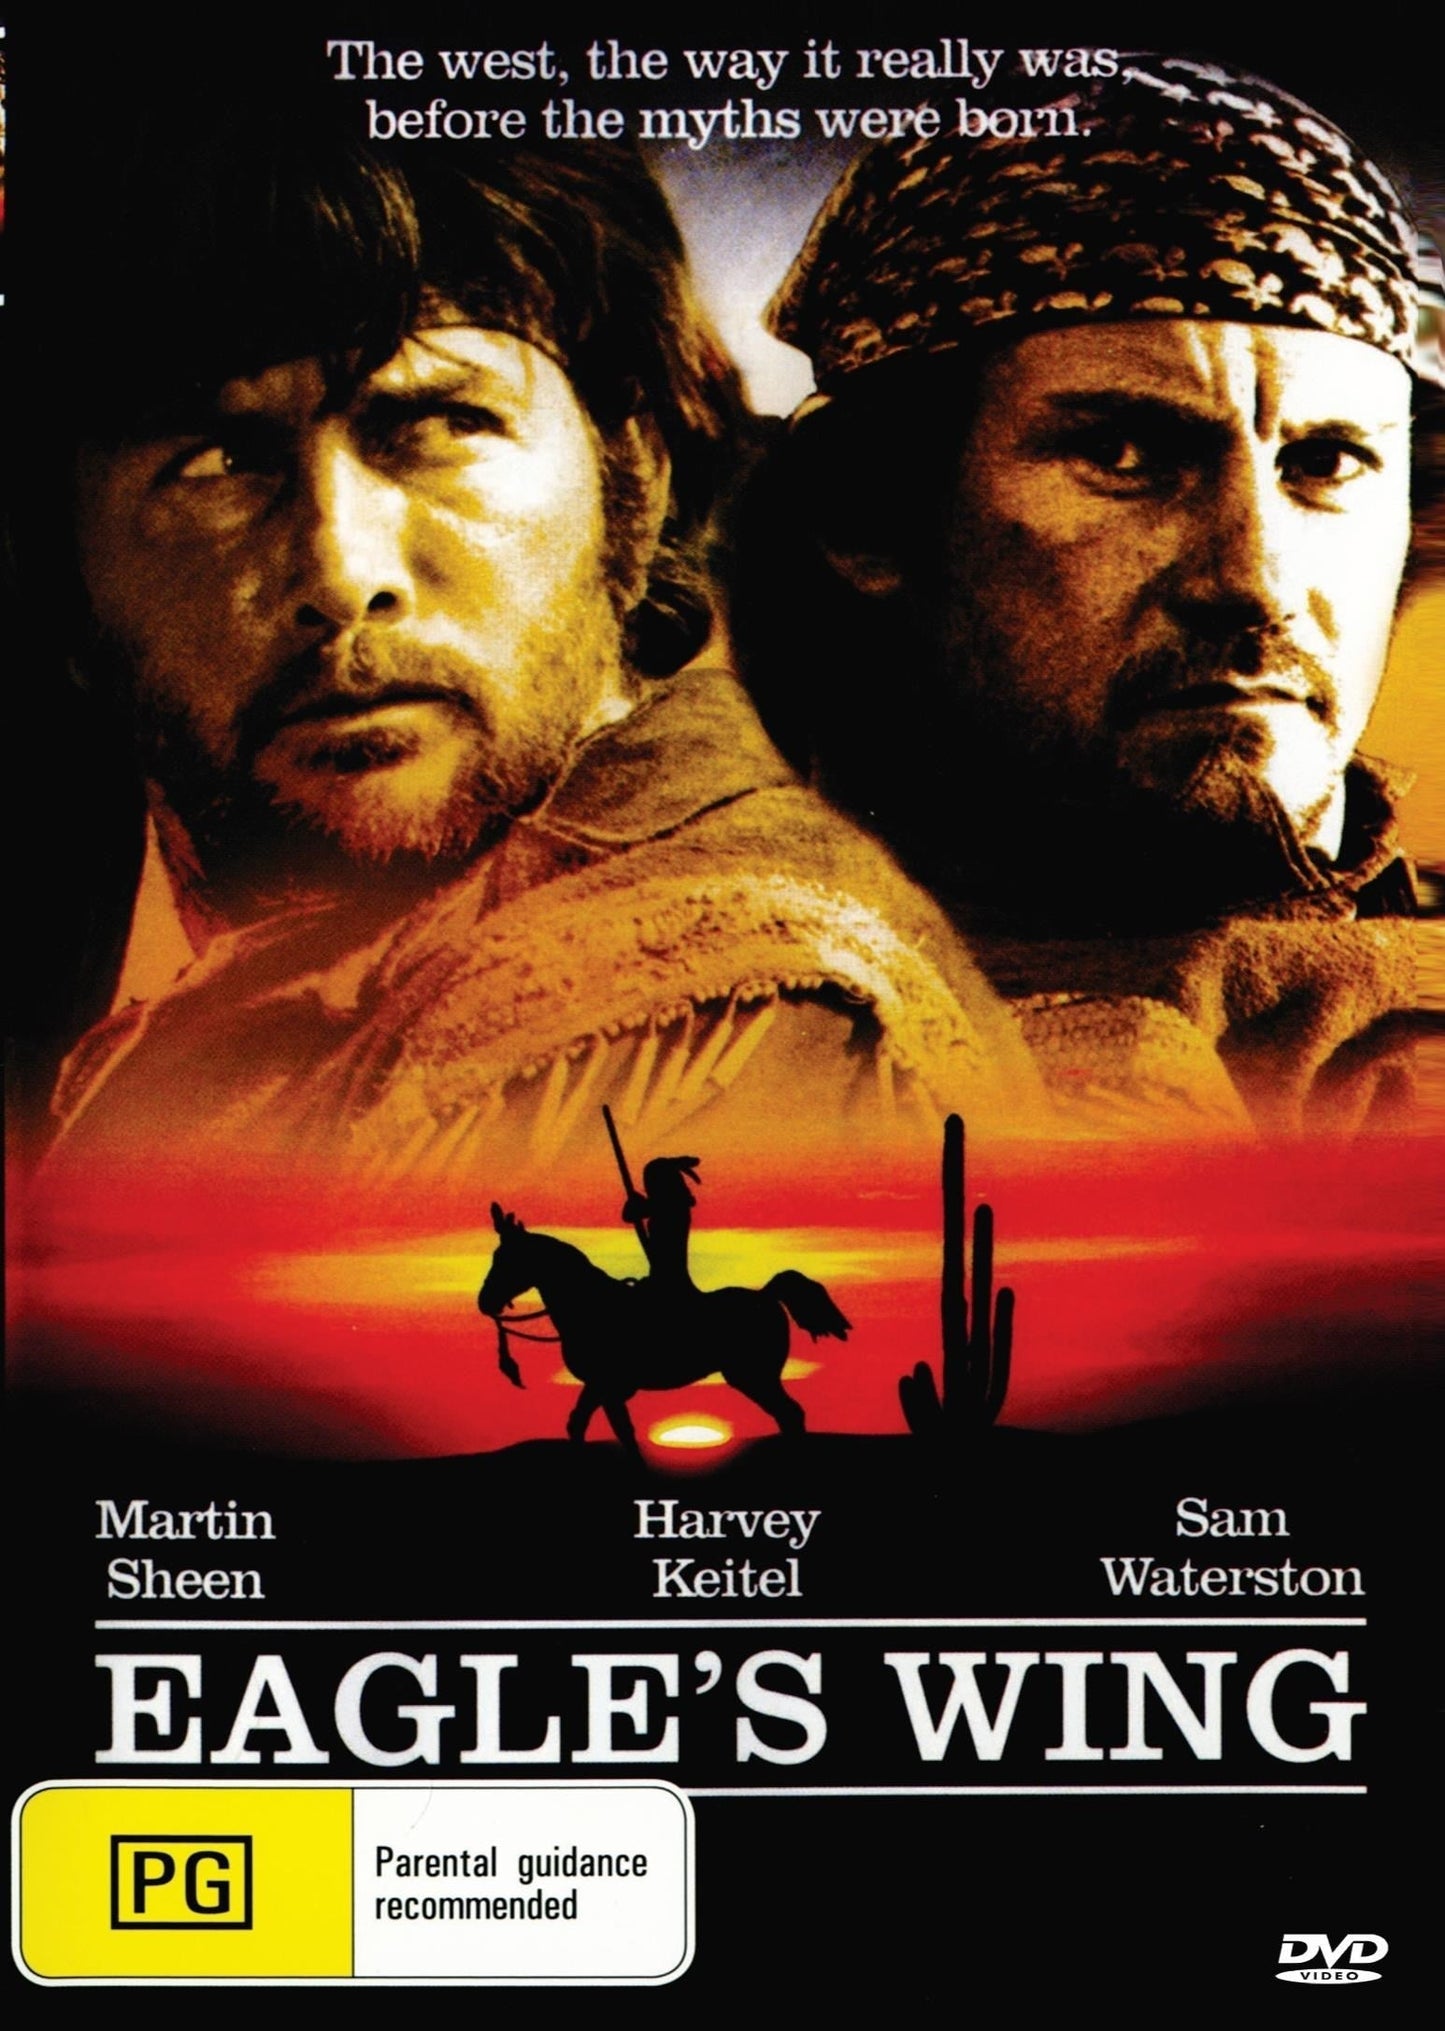 Eagle's Wing rareandcollectibledvds